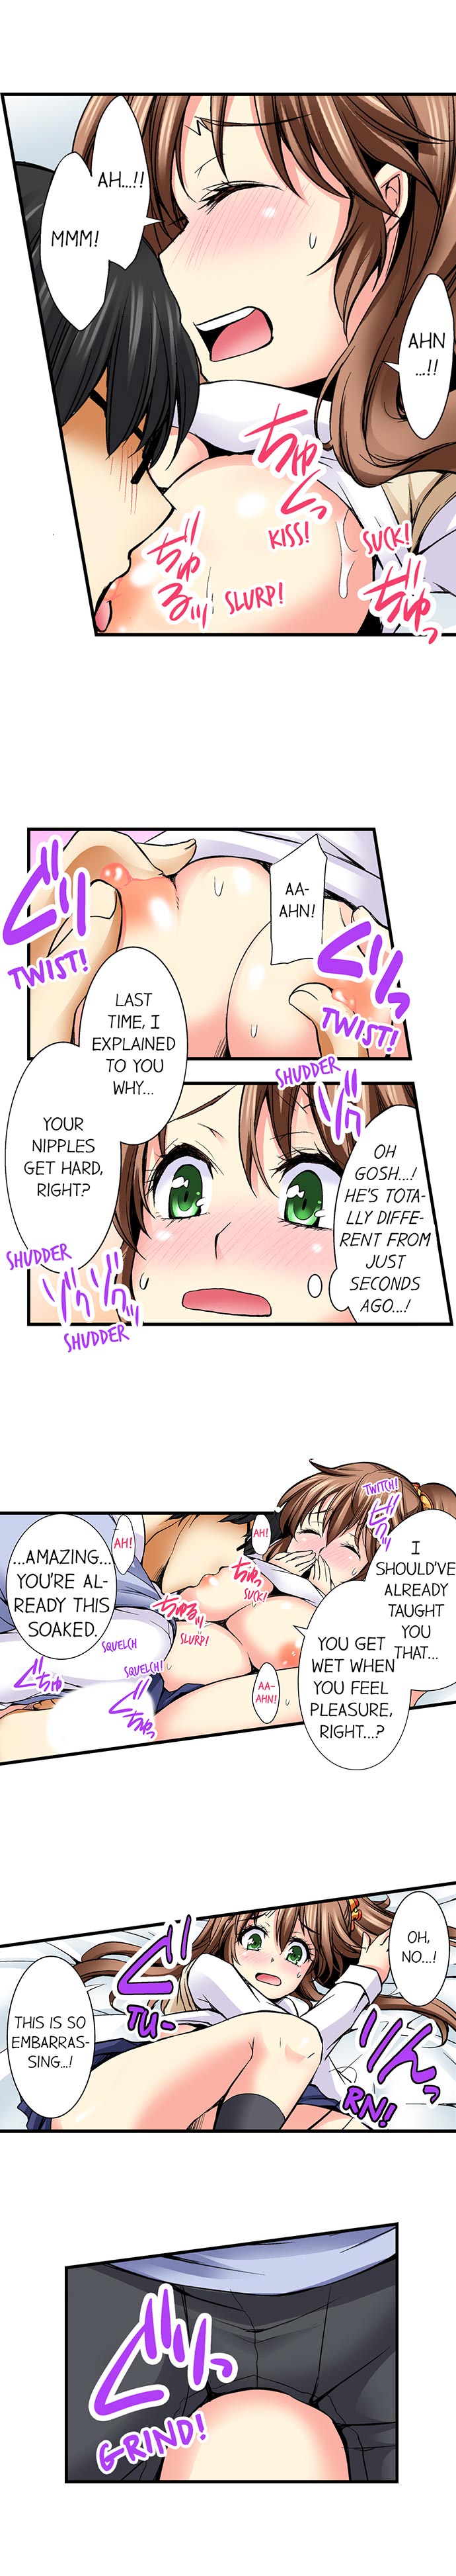 Why Can't i Have Sex With My Teacher? - Chapter 8 Page 9